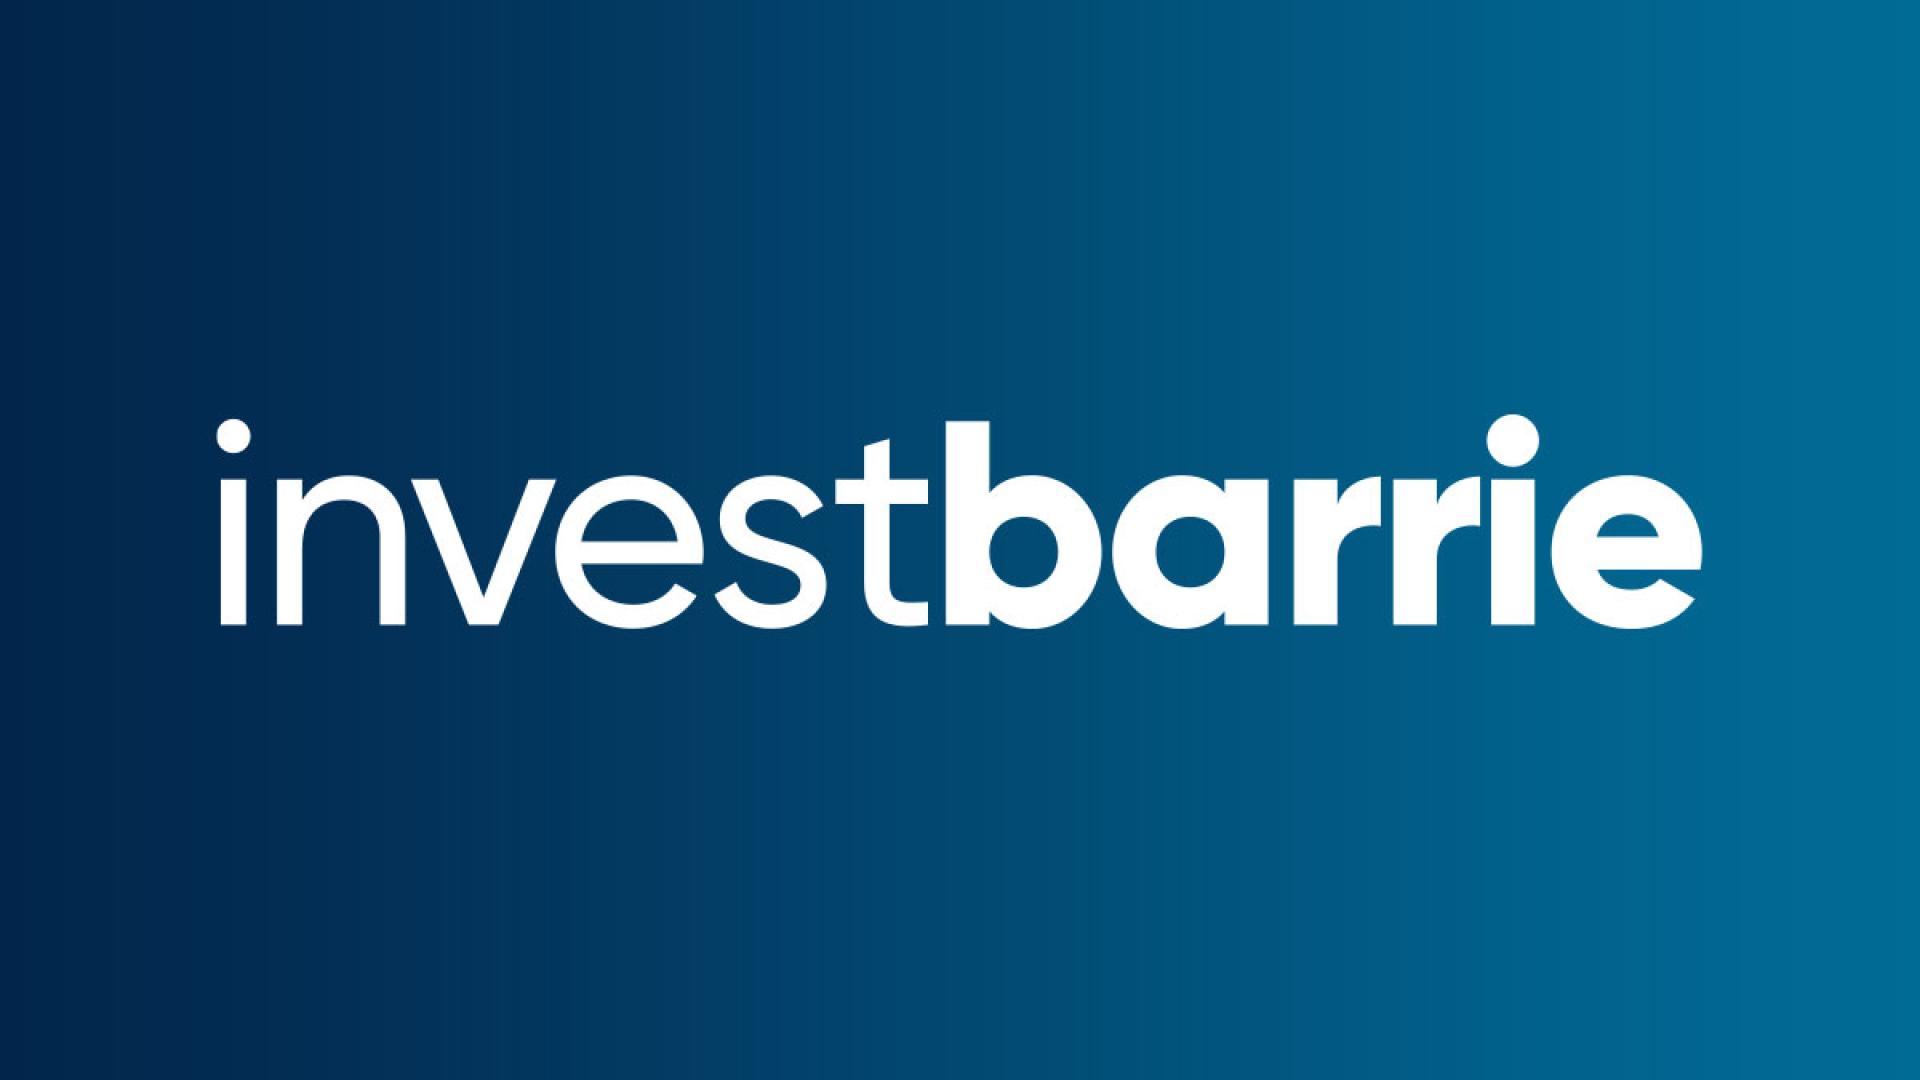 Invest Barrie logo on gradient background